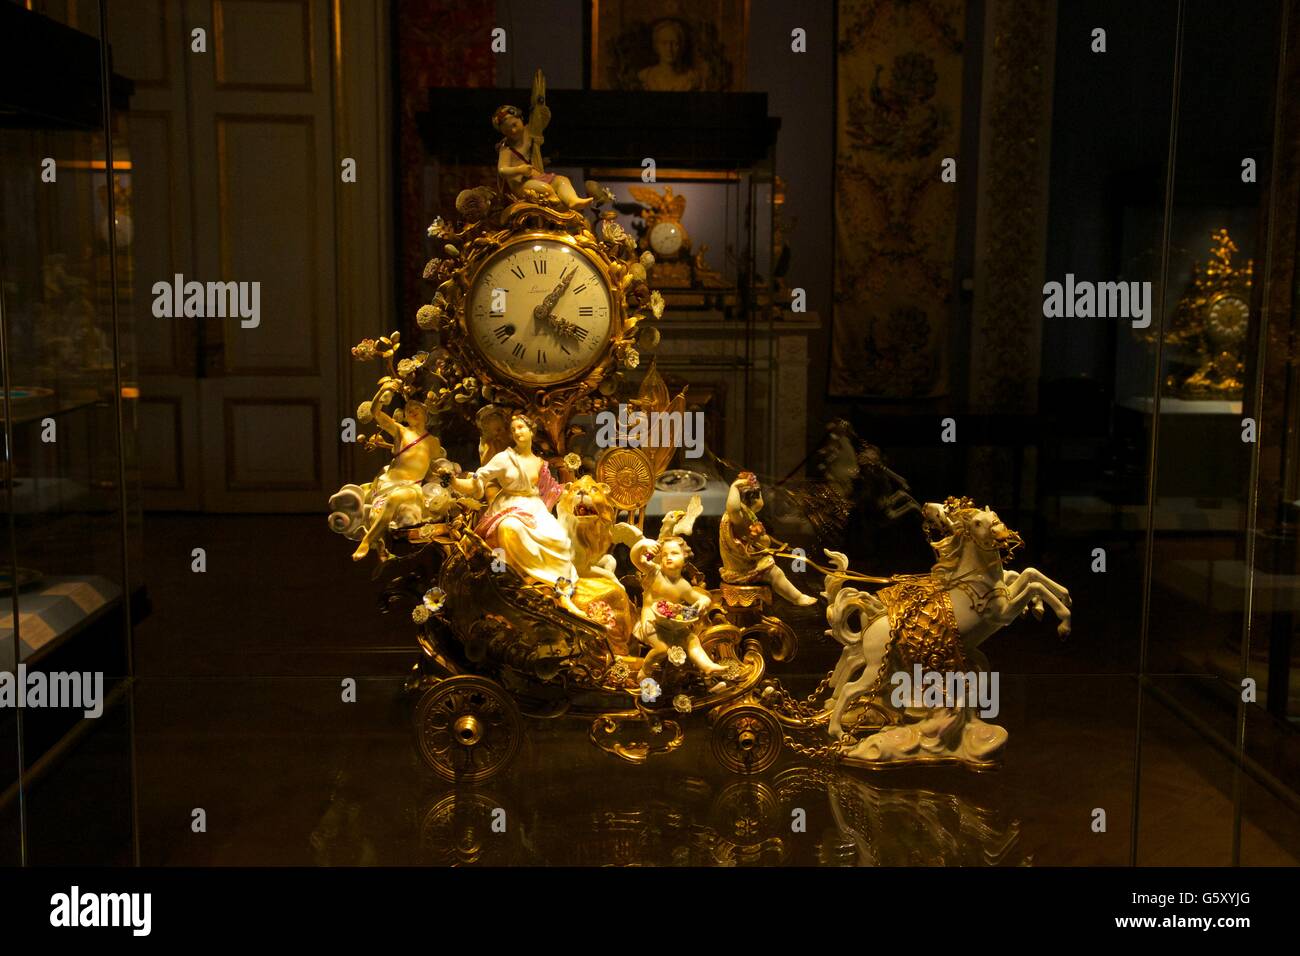 Ornate Clock in state rooms, Winter Palace, State Hermitage Museum, Saint Petersburg, Russia Stock Photo